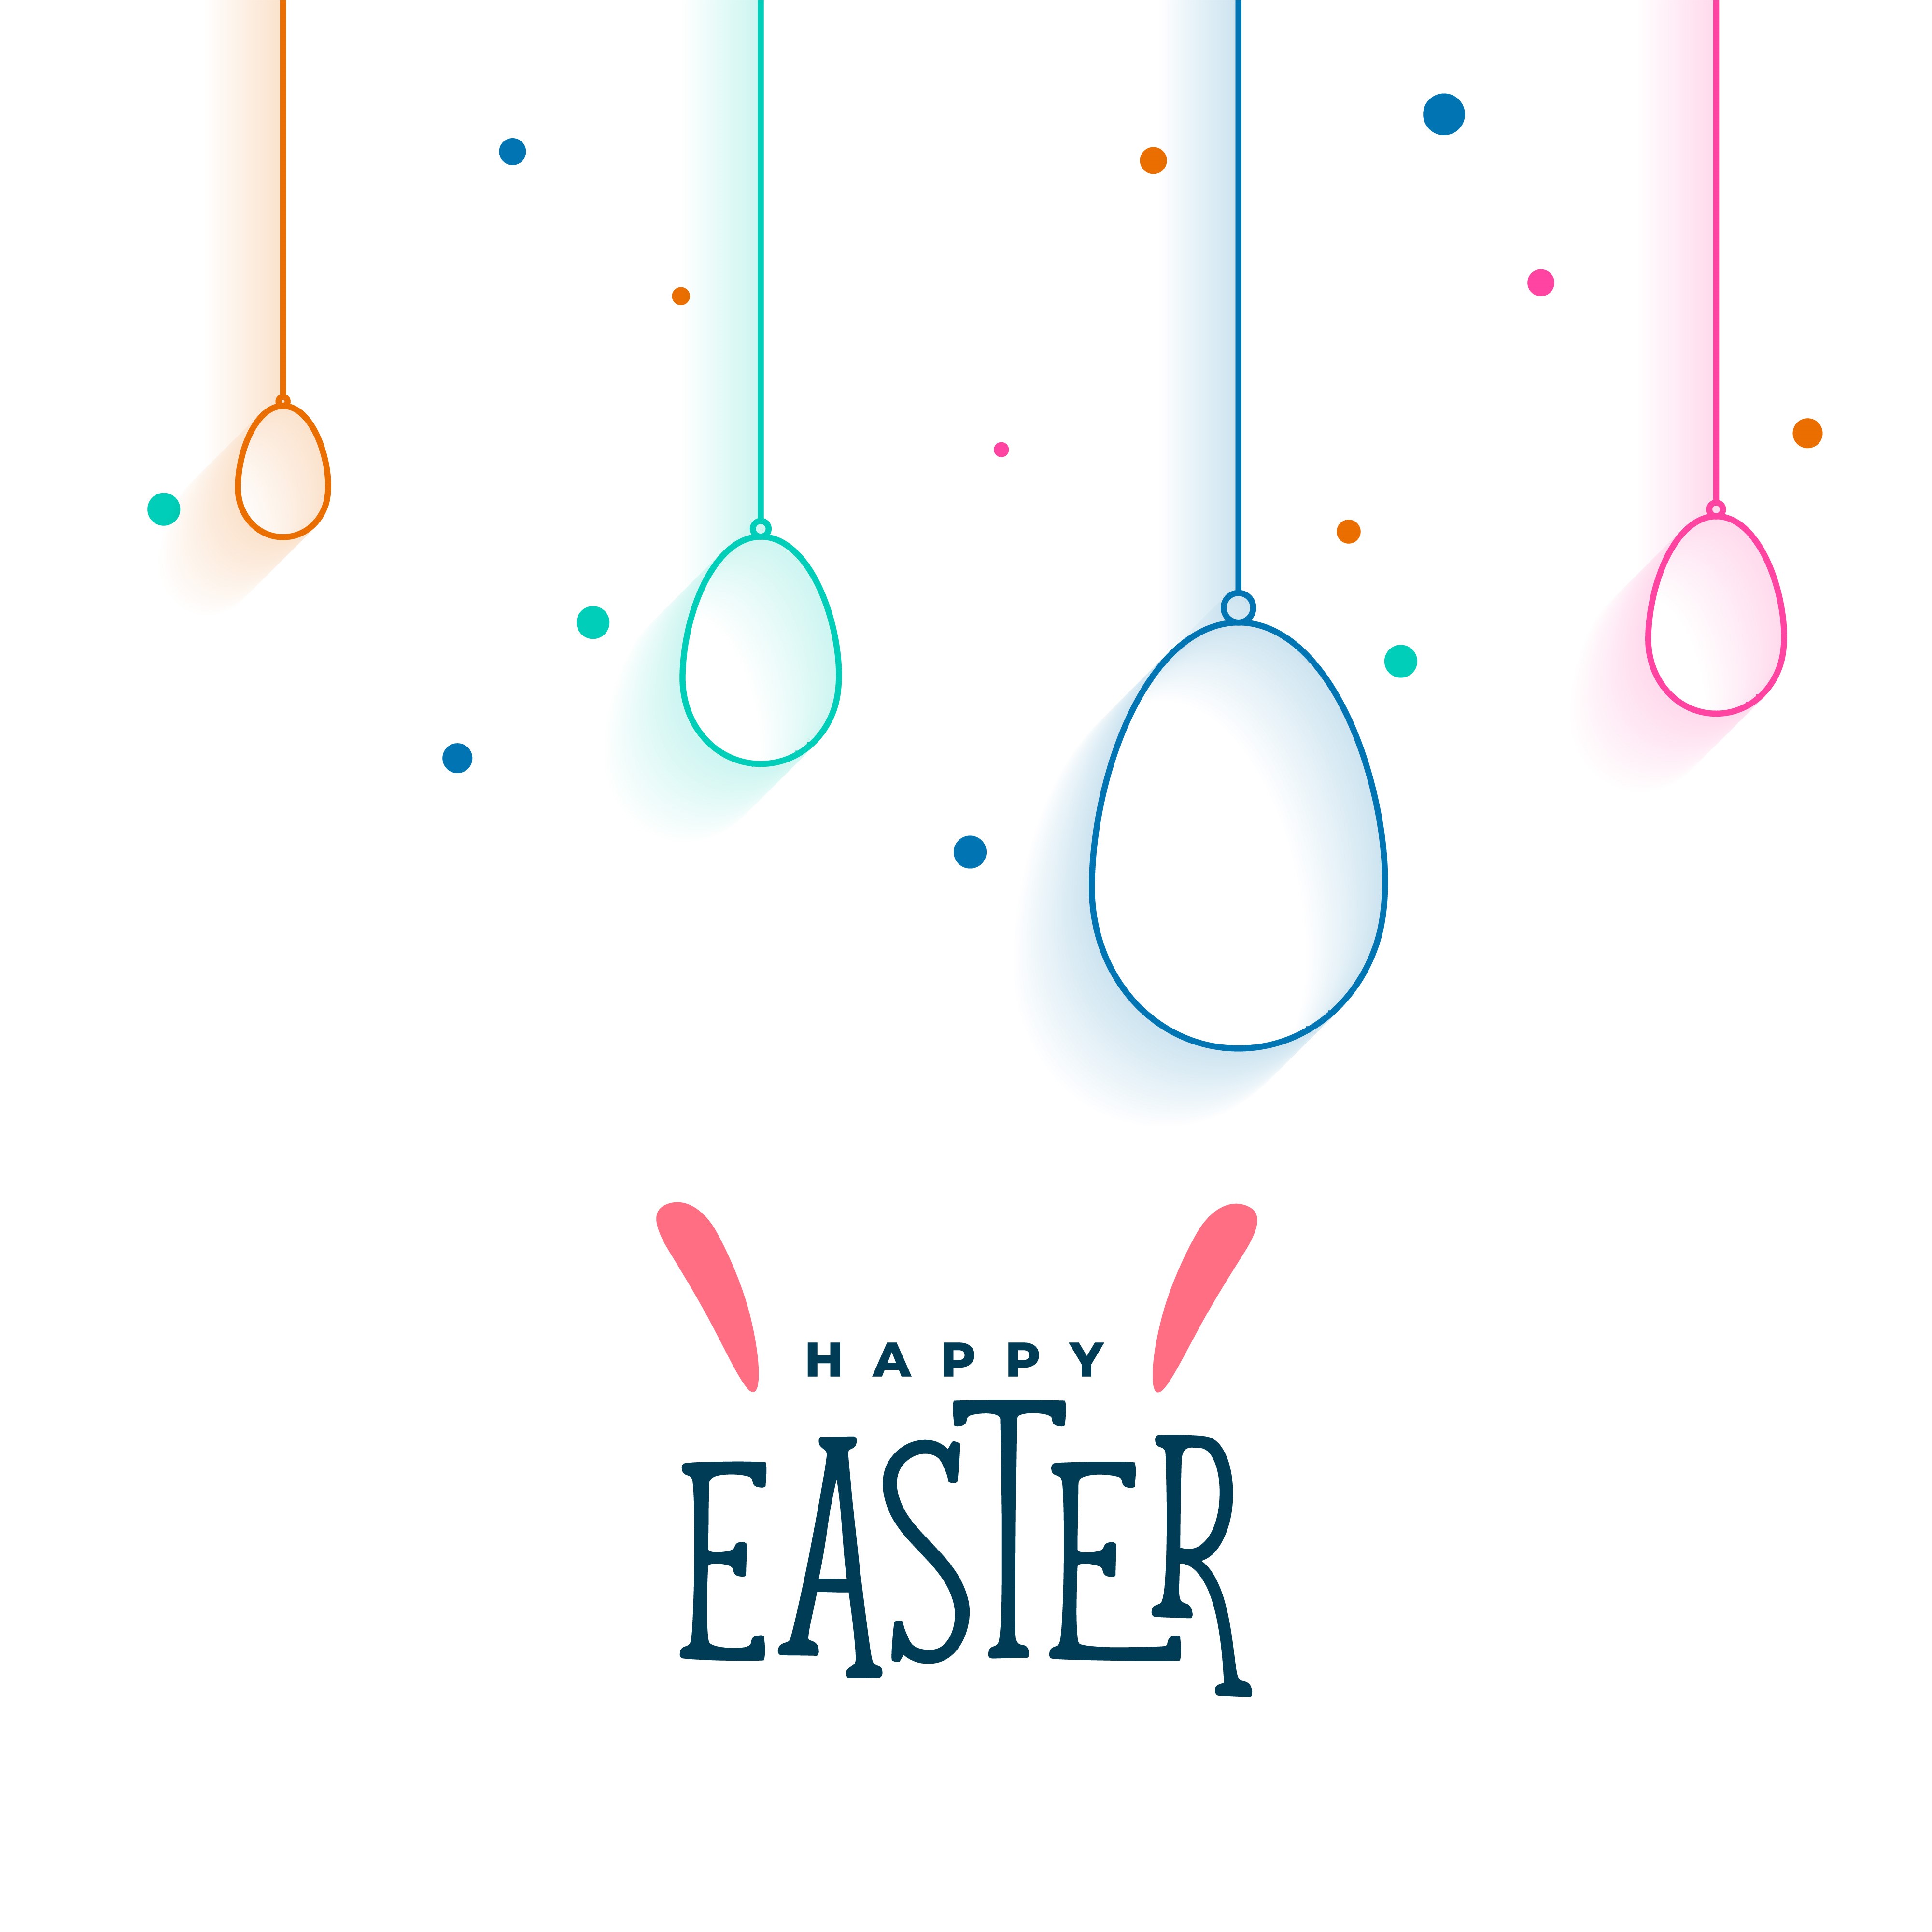 multi-coloured eggs hanging from the top edge with "Happy Easter" written below.